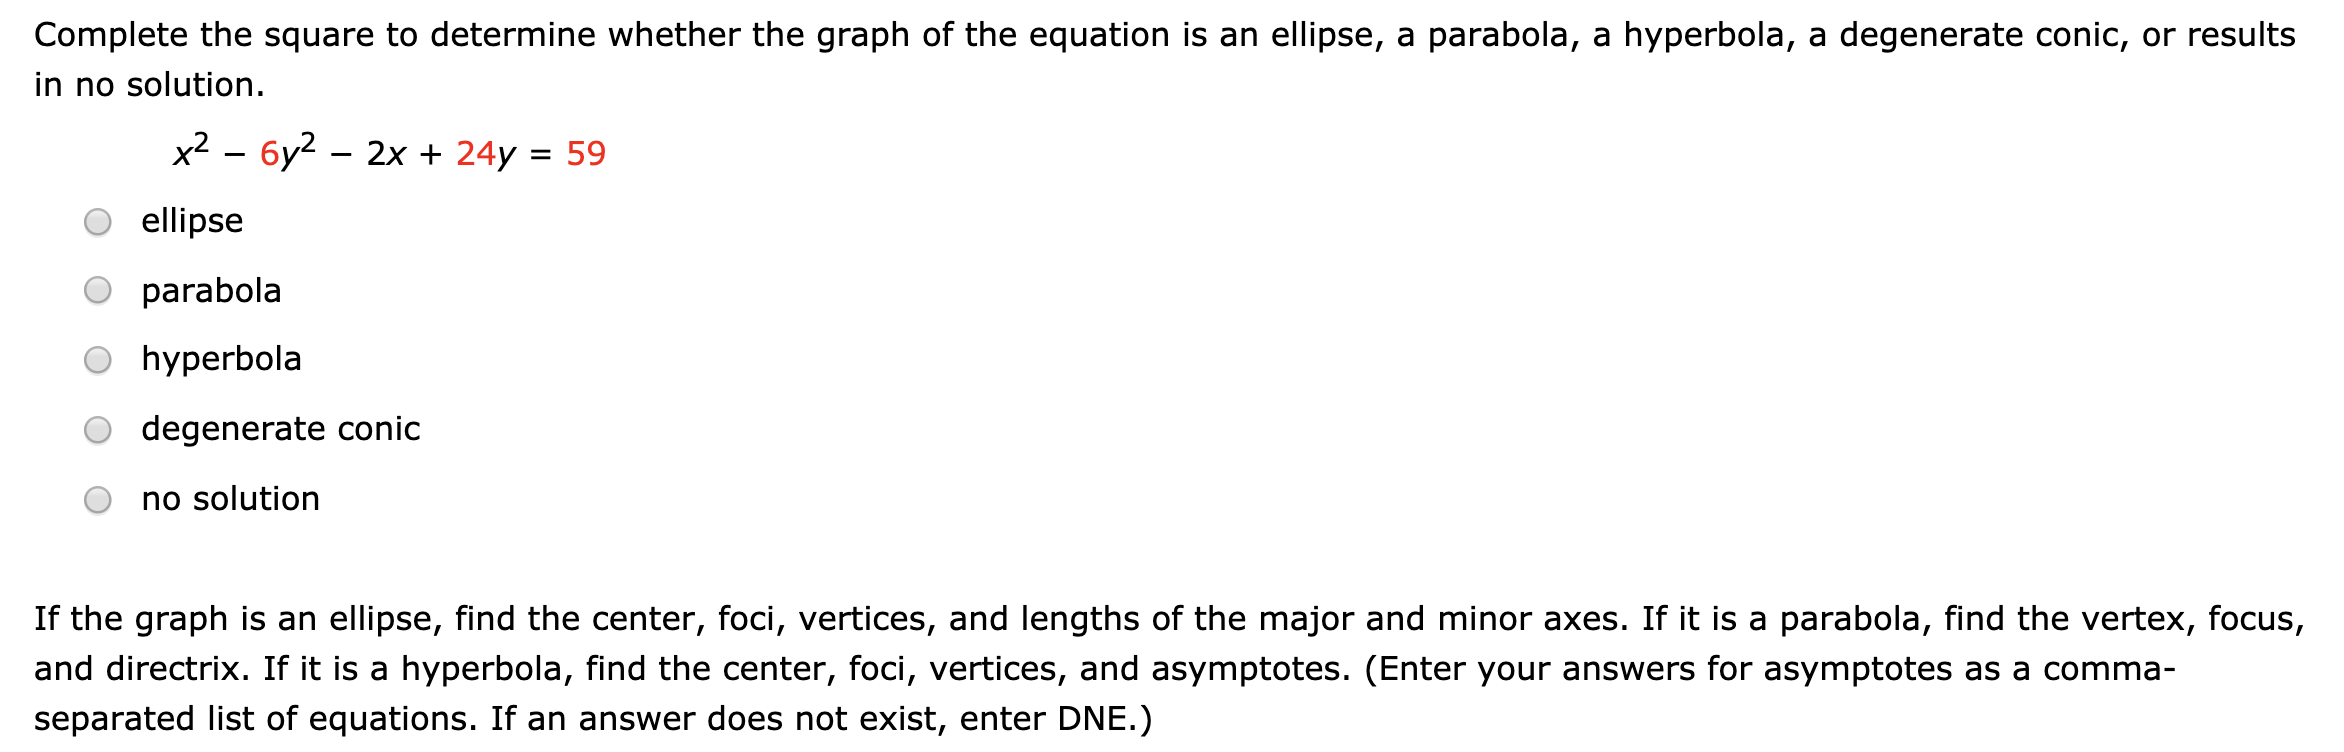 Complete the square to determine whether the graph of the equation is an ellipse, a parabola, a hyperbola, a degenerate conic, or results
in no solution.
x2 – 6y2 – 2x + 24y = 59
ellipse
parabola
O hyperbola
degenerate conic
no solution
If the graph is an ellipse, find the center, foci, vertices, and lengths of the major and minor axes. If it is a parabola, find the vertex, focus,
and directrix. If it is a hyperbola, find the center, foci, vertices, and asymptotes. (Enter your answers for asymptotes as a comma-
separated list of equations. If an answer does not exist, enter DNE.)
